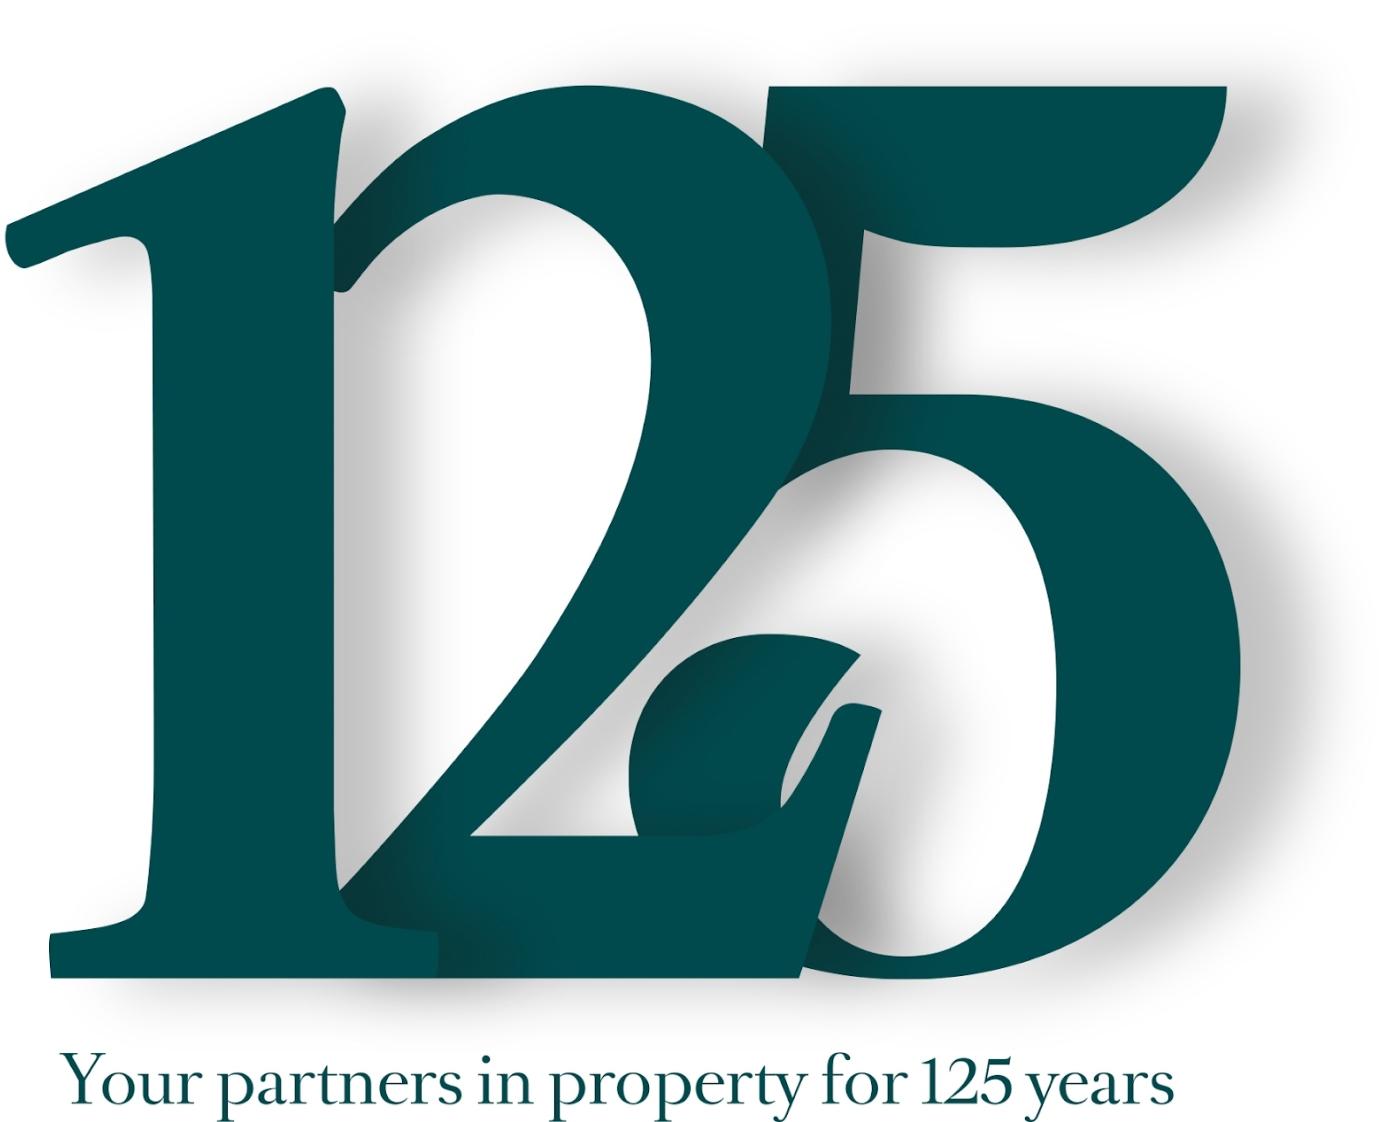 A graphic depicting the 125 years history with a stylised font displaying '125'